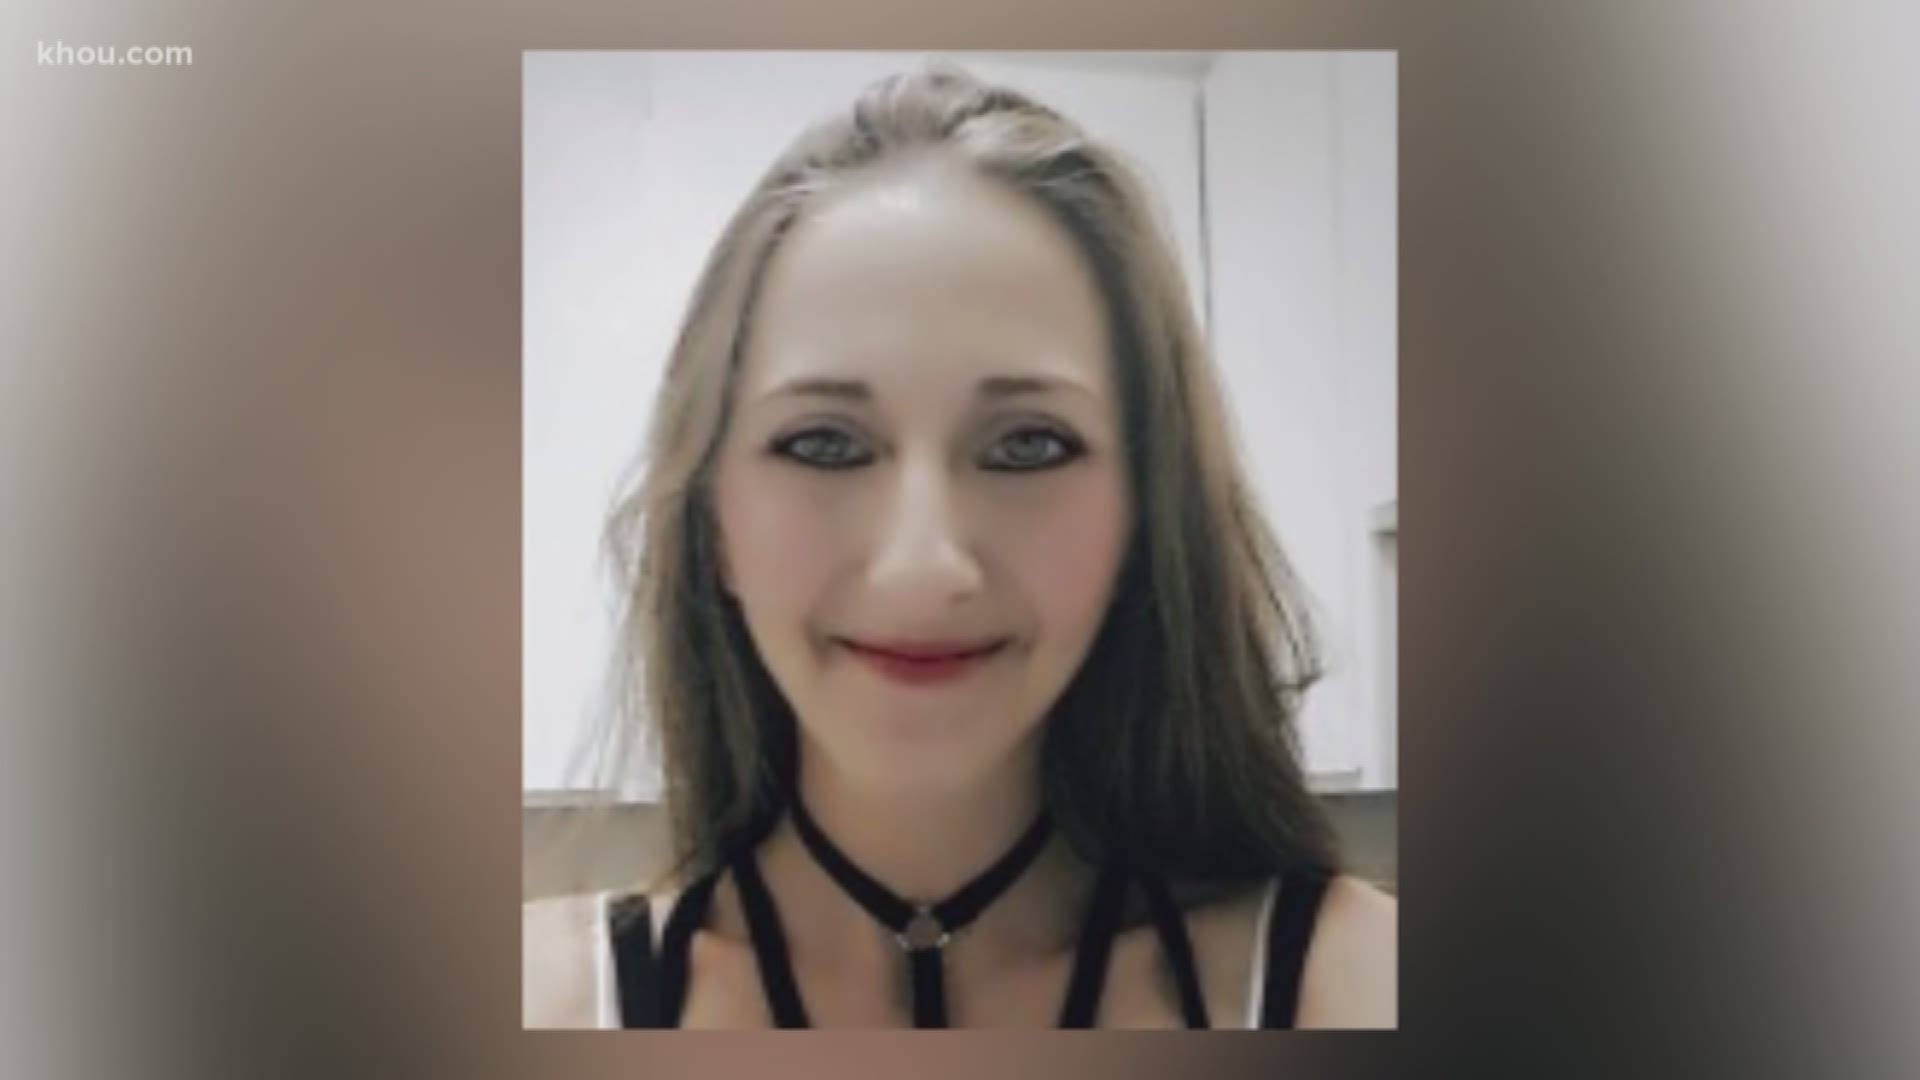 The mother of a missing woman whose body is believed to have been found in a Third Ward manhole is sharing her story with KHOU 11. Trisha Valentine’s daughter, Brittany Burfield, 37, went missing more than a year ago.